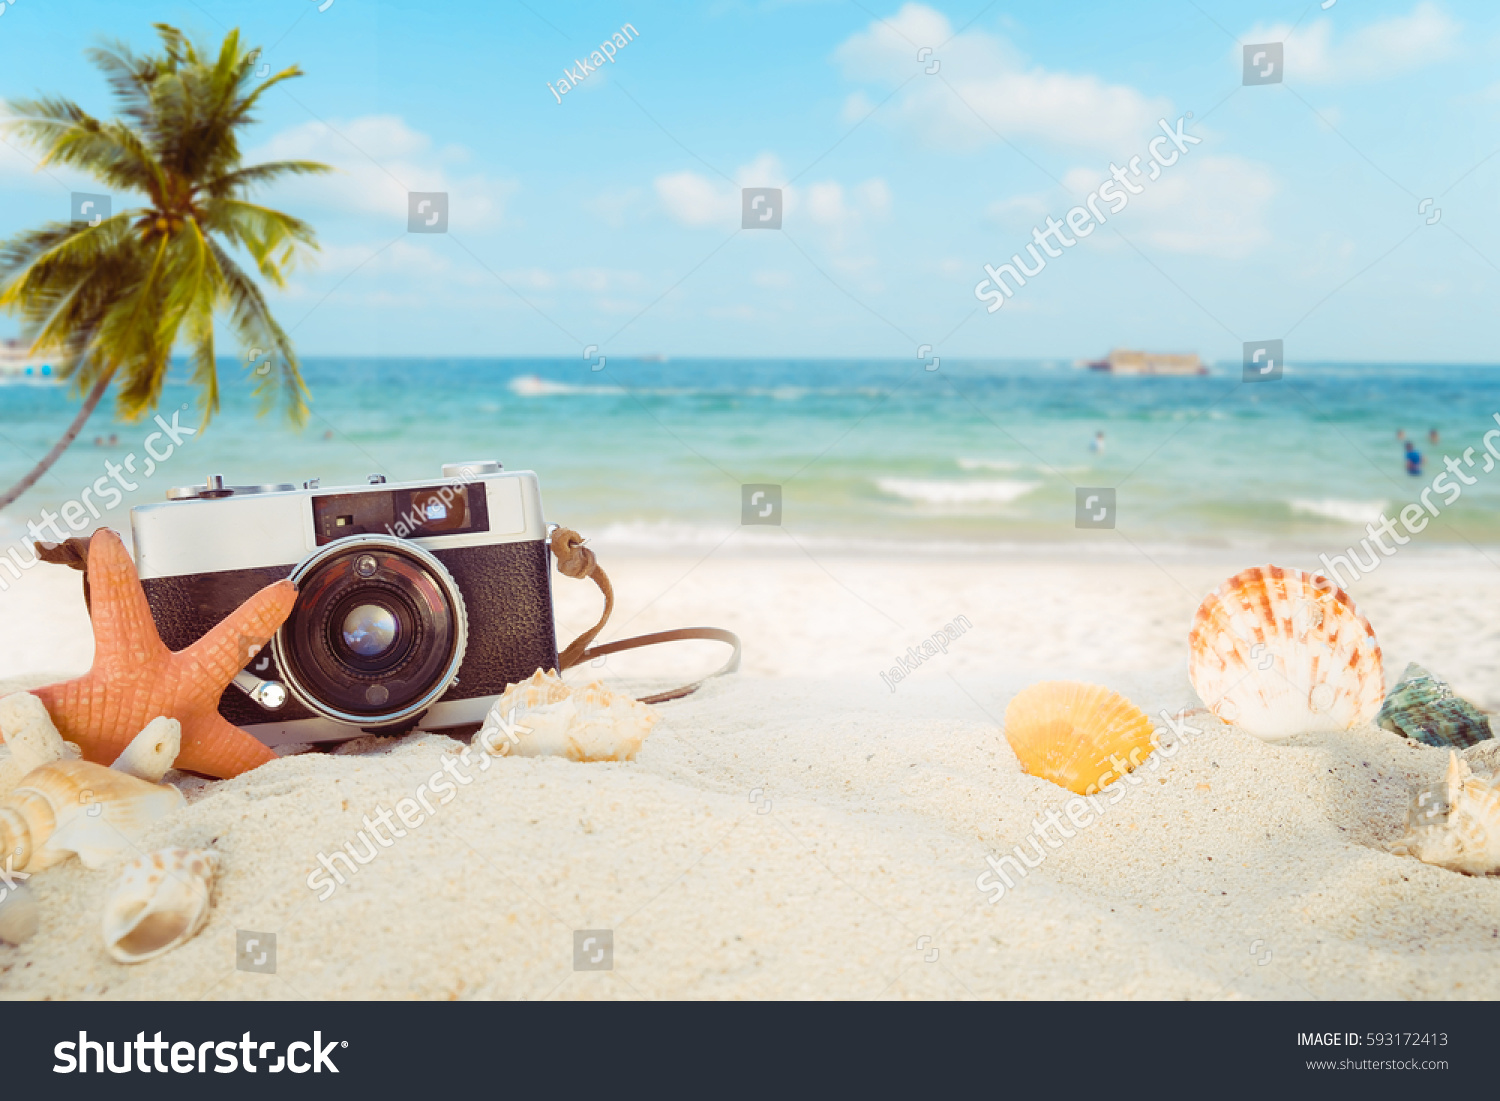 The concept of leisure travel in the summer on a tropical beach seaside. retro camera on the sandbar with starfish, shells, coral on sandbar and blur sea background.  vintage color tone styles. #593172413